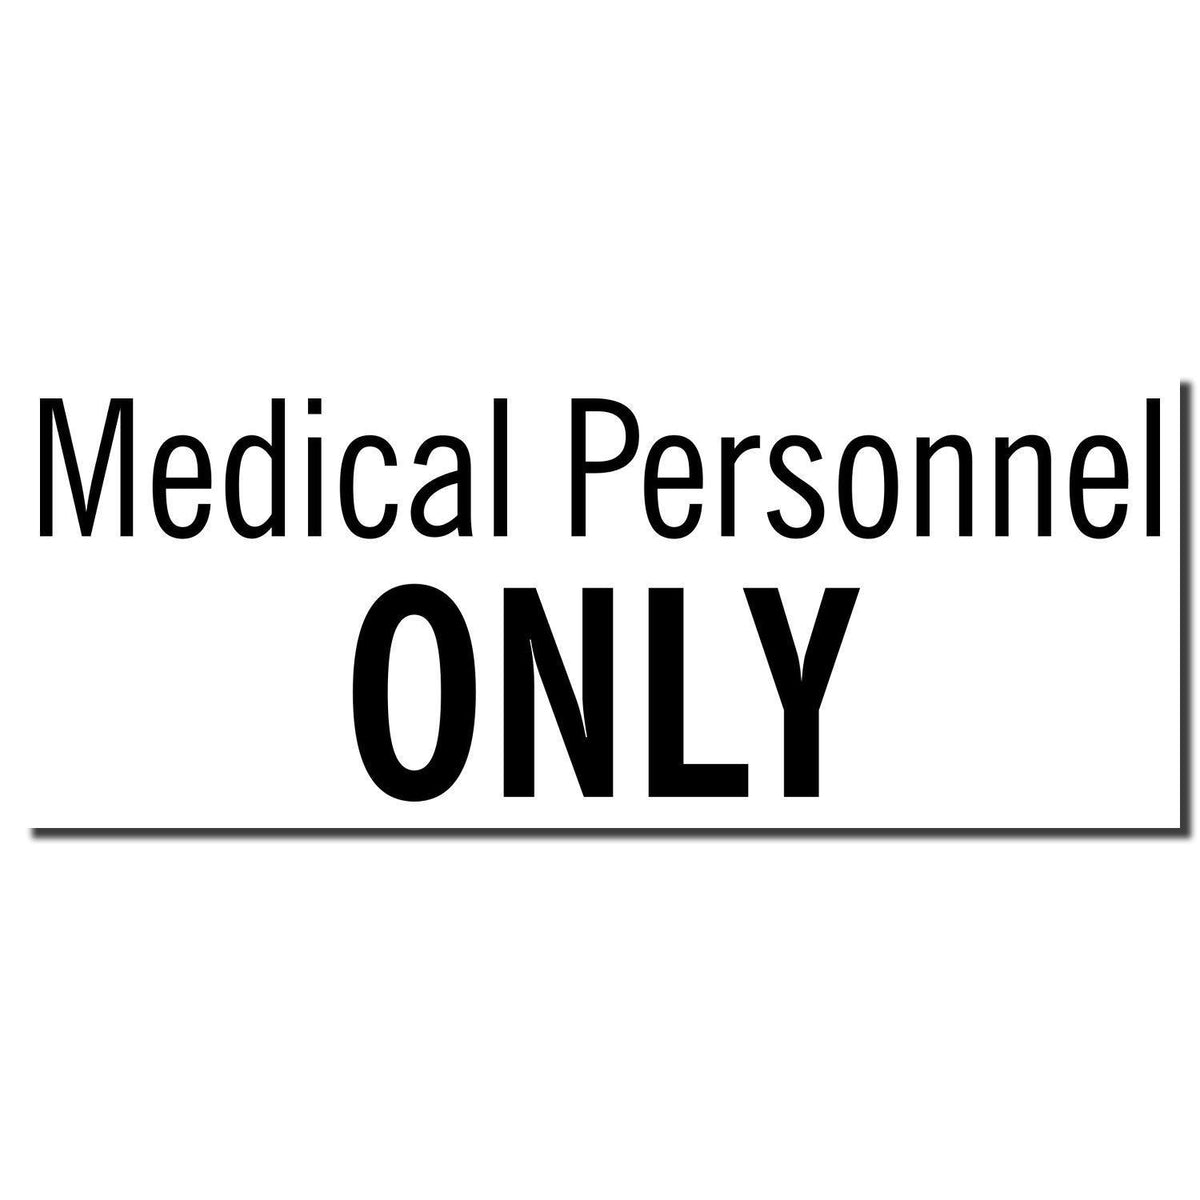 Medical Personnel Only Rubber Stamp - Engineer Seal Stamps - Brand_Acorn, Impression Size_Small, Stamp Type_Regular Stamp, Type of Use_Medical Office